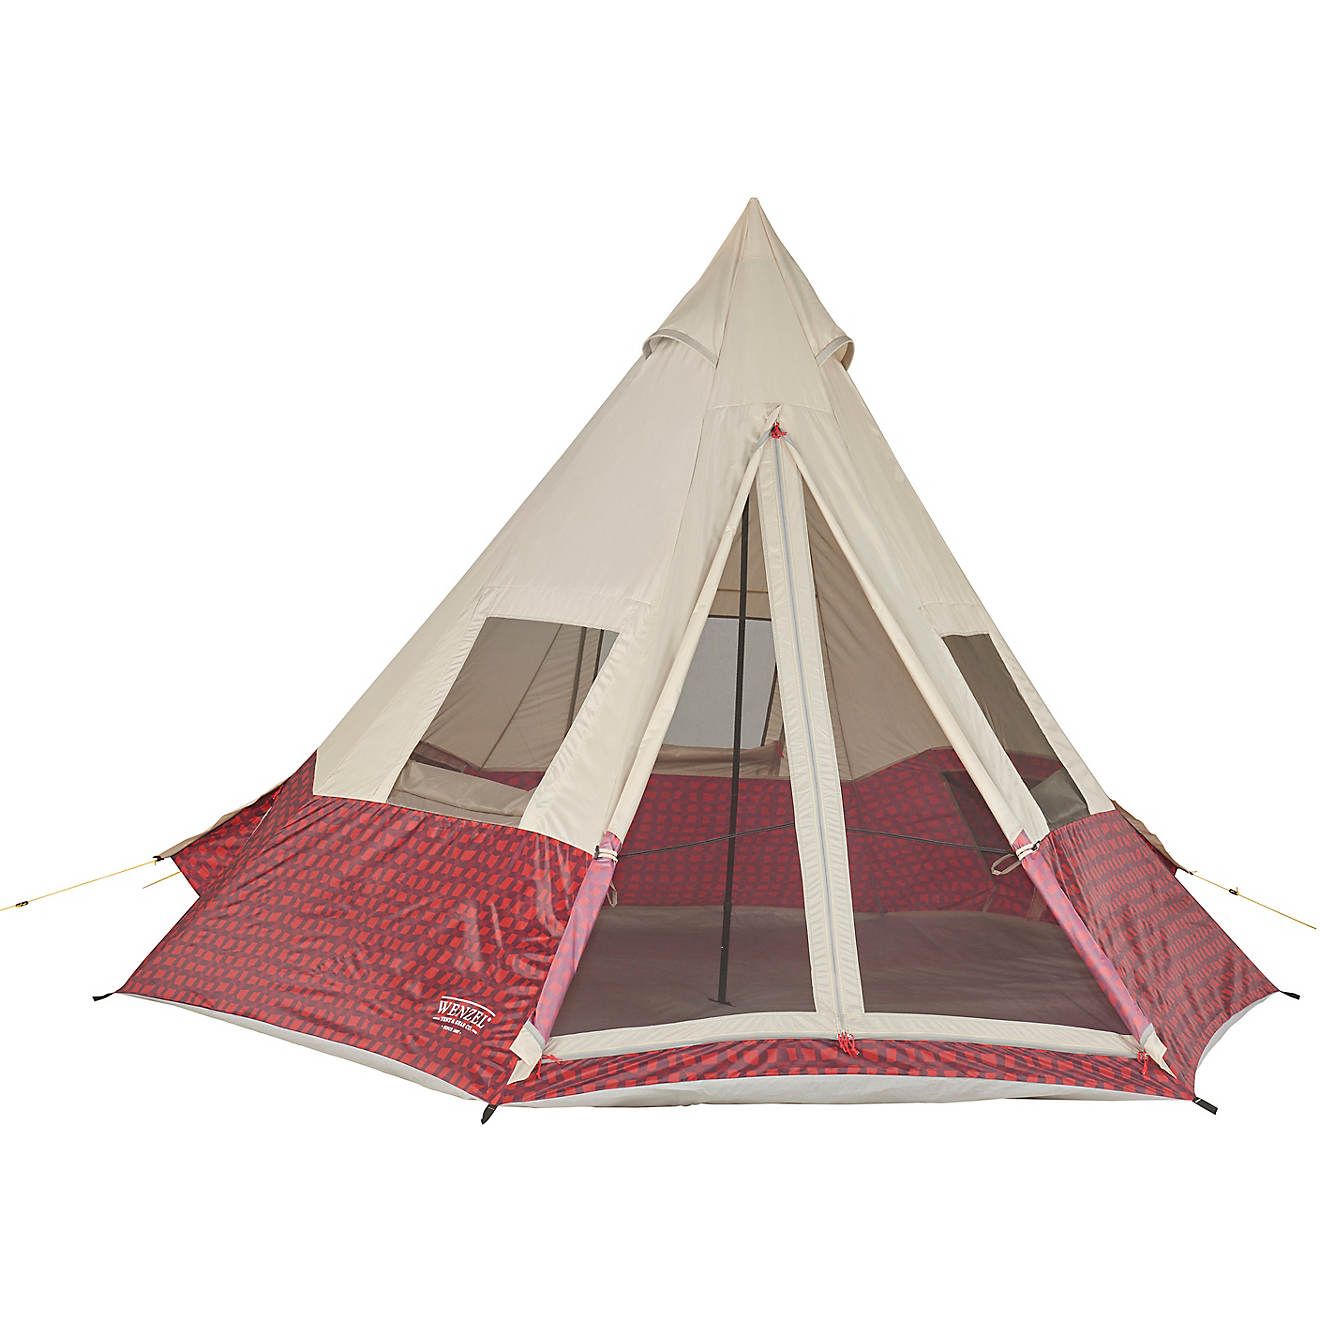 Wenzel Shenanigan 5 Person Teepee Tent | Academy Sports + Outdoor Affiliate